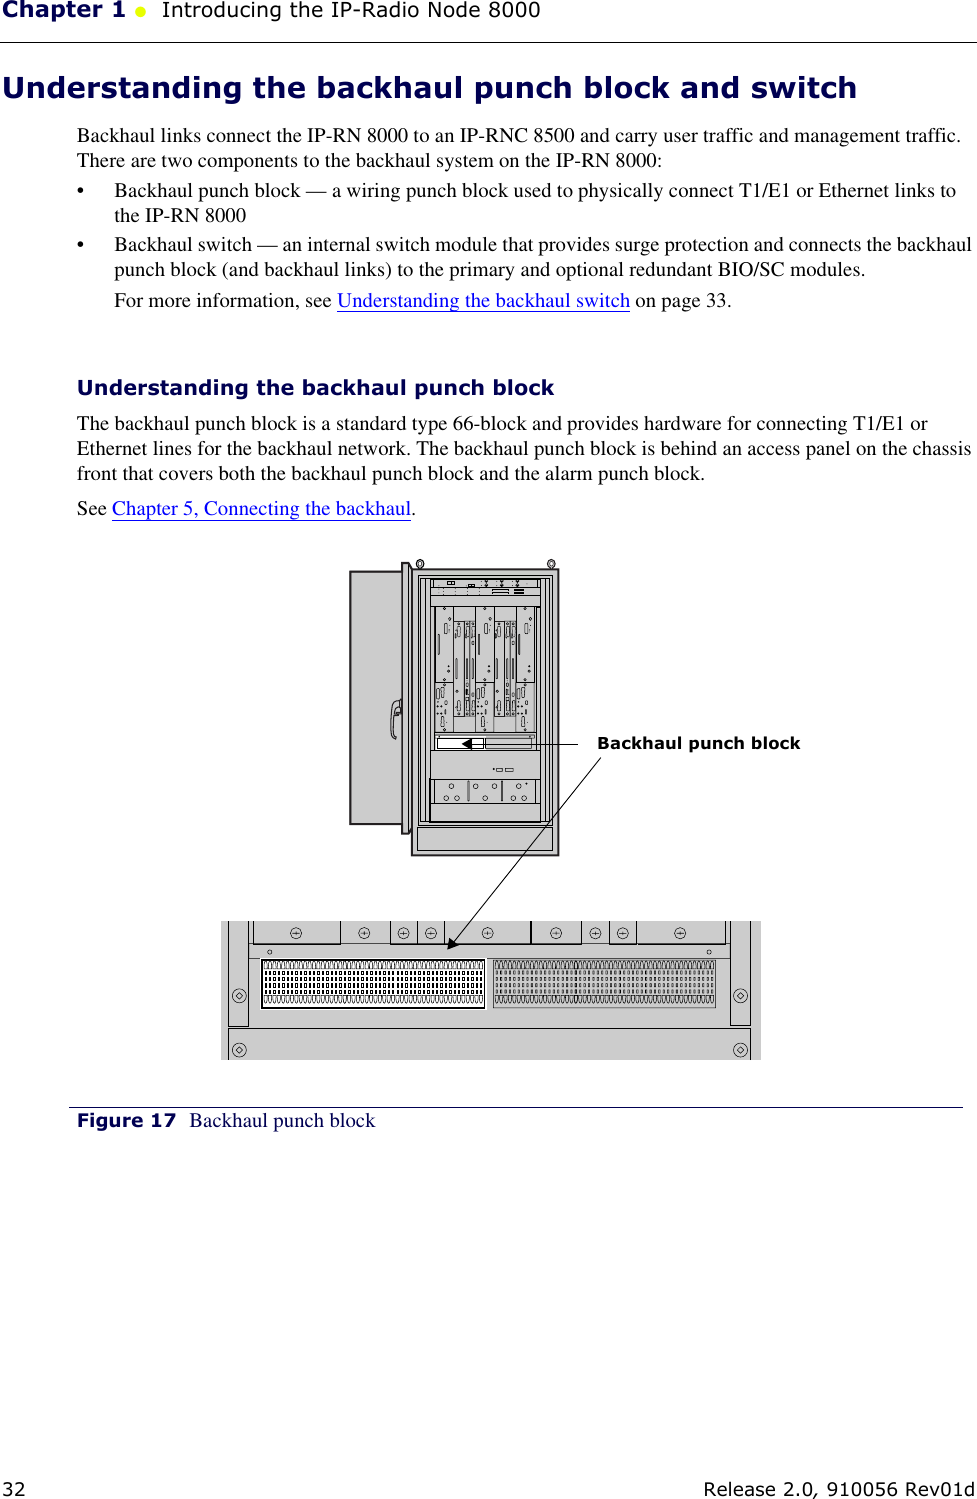 Chapter 1 ●  Introducing the IP-Radio Node 800032 Release 2.0, 910056 Rev01dUnderstanding the backhaul punch block and switchBackhaul links connect the IP-RN 8000 to an IP-RNC 8500 and carry user traffic and management traffic. There are two components to the backhaul system on the IP-RN 8000: • Backhaul punch block — a wiring punch block used to physically connect T1/E1 or Ethernet links to the IP-RN 8000• Backhaul switch — an internal switch module that provides surge protection and connects the backhaul punch block (and backhaul links) to the primary and optional redundant BIO/SC modules.For more information, see Understanding the backhaul switch on page 33.Understanding the backhaul punch block The backhaul punch block is a standard type 66-block and provides hardware for connecting T1/E1 or Ethernet lines for the backhaul network. The backhaul punch block is behind an access panel on the chassis front that covers both the backhaul punch block and the alarm punch block. See Chapter 5, Connecting the backhaul.Figure 17 Backhaul punch block Backhaul punch block